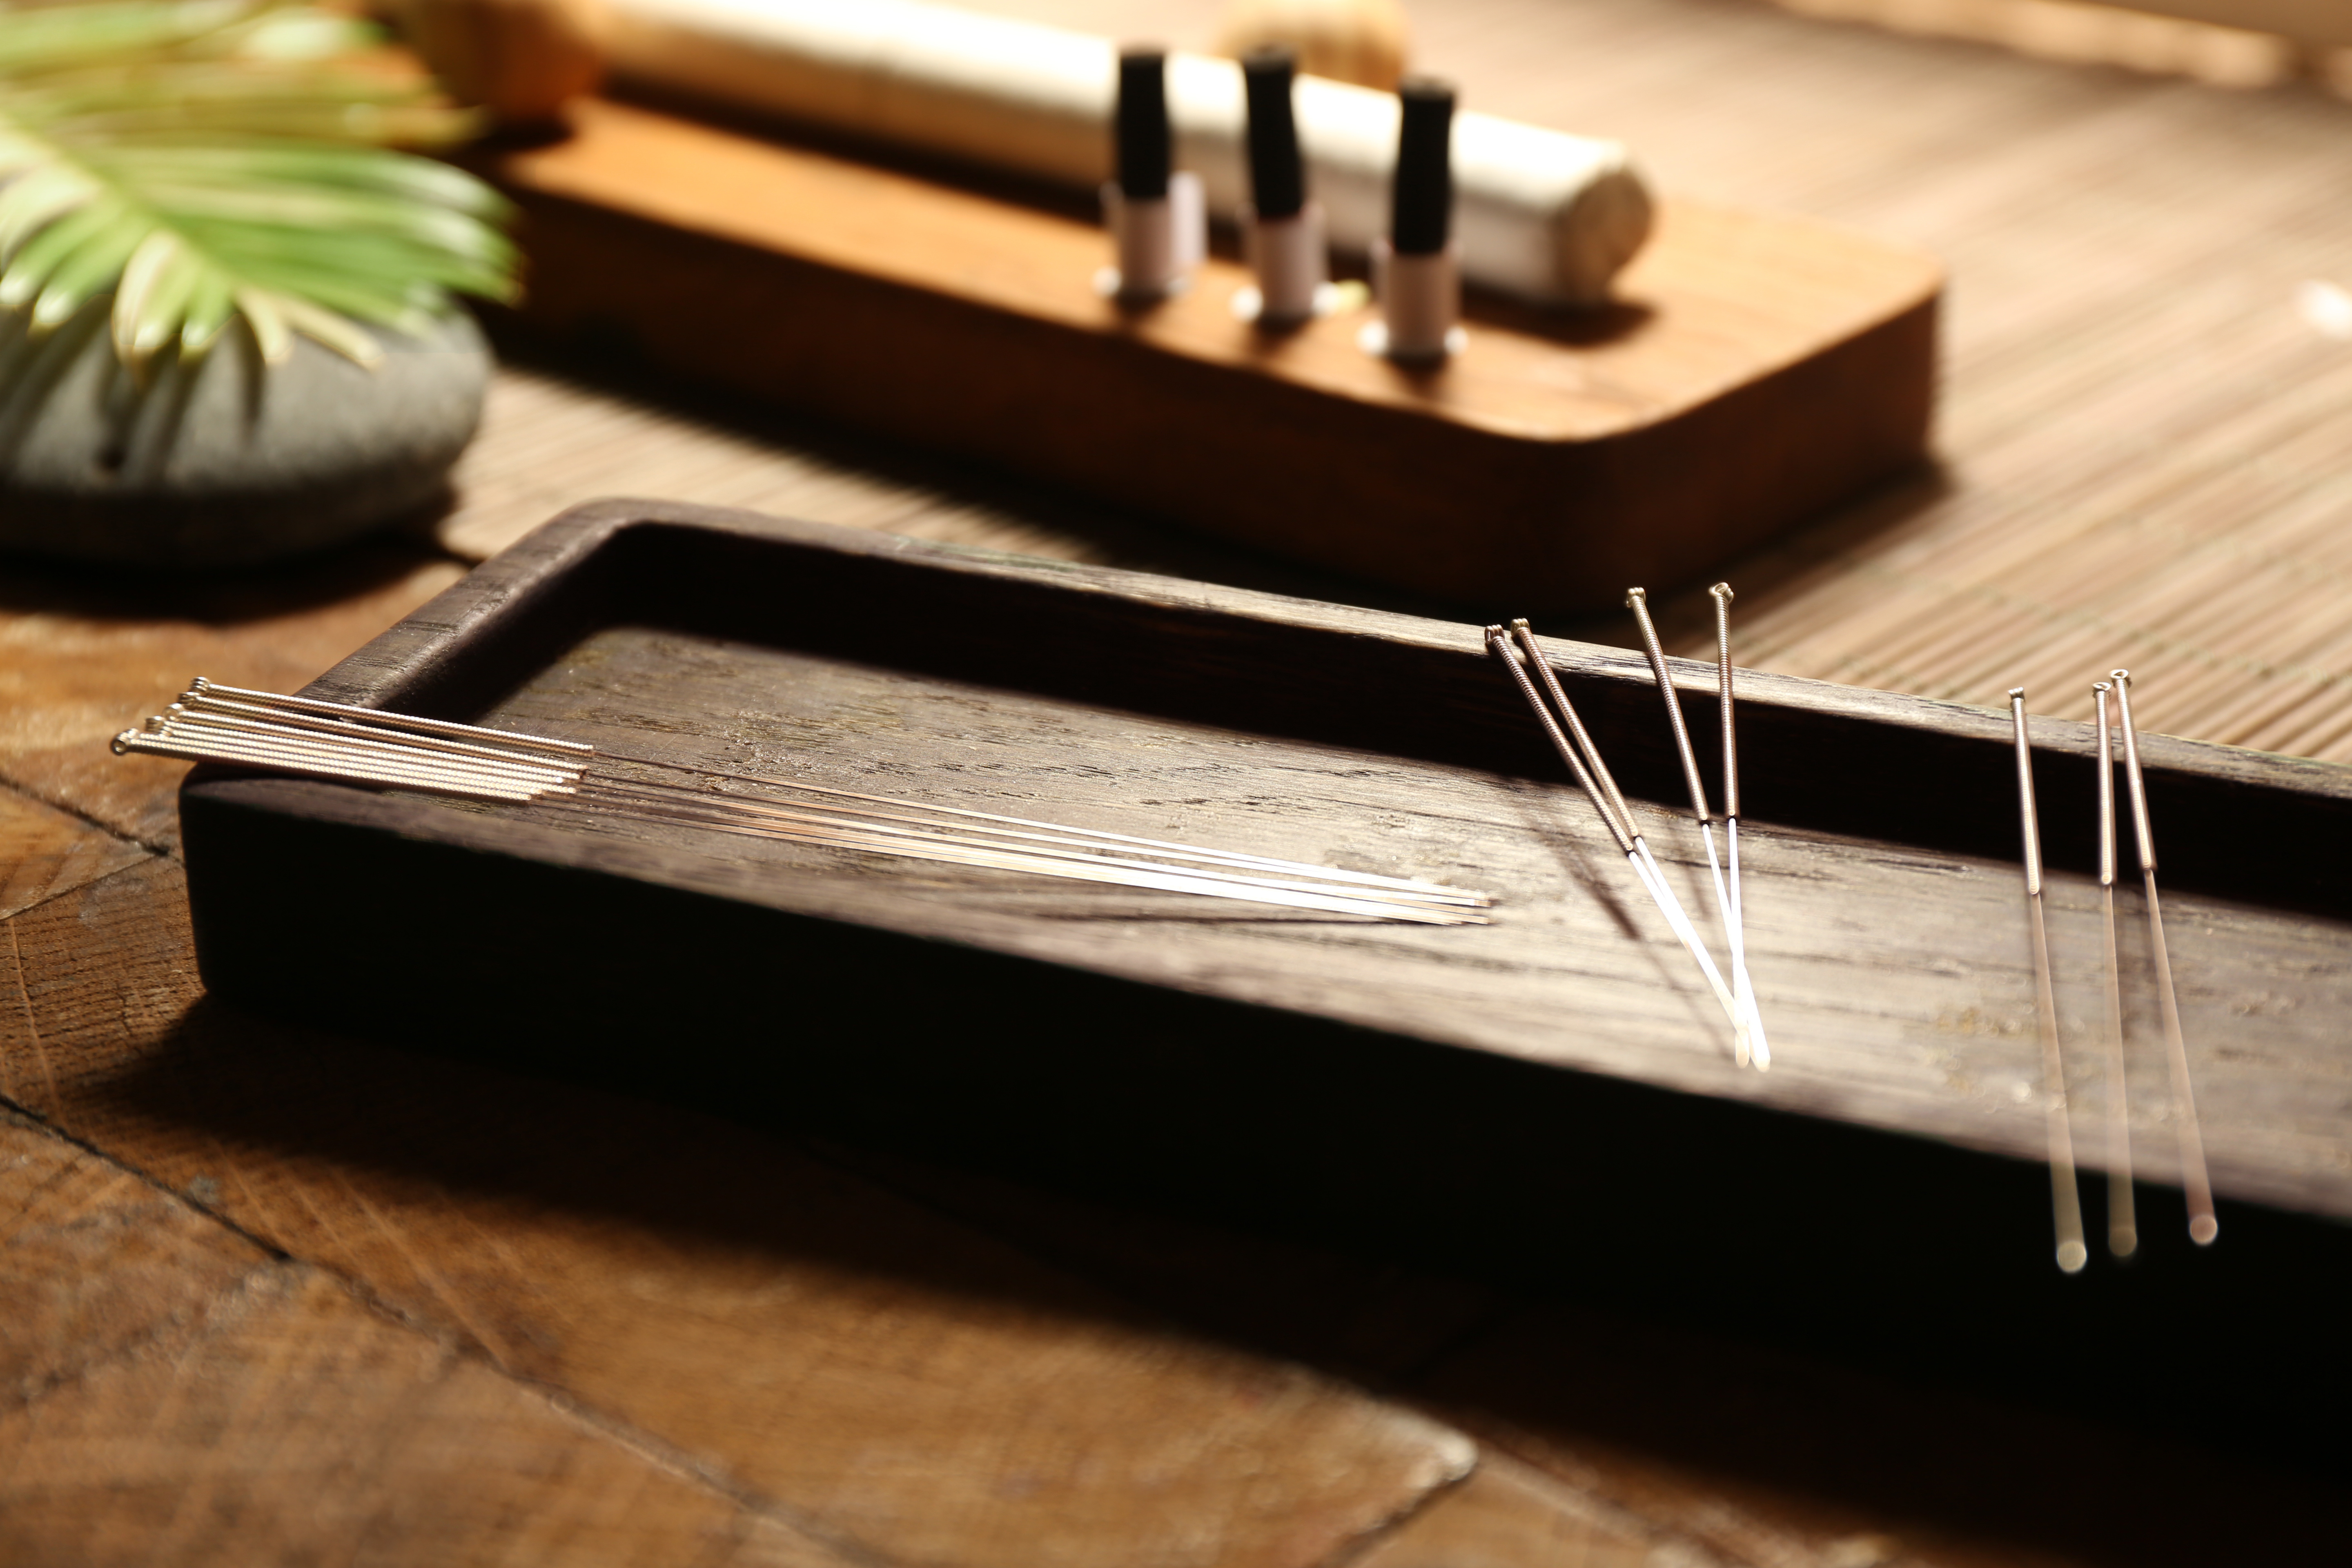 Acupuncture needles on wooden table